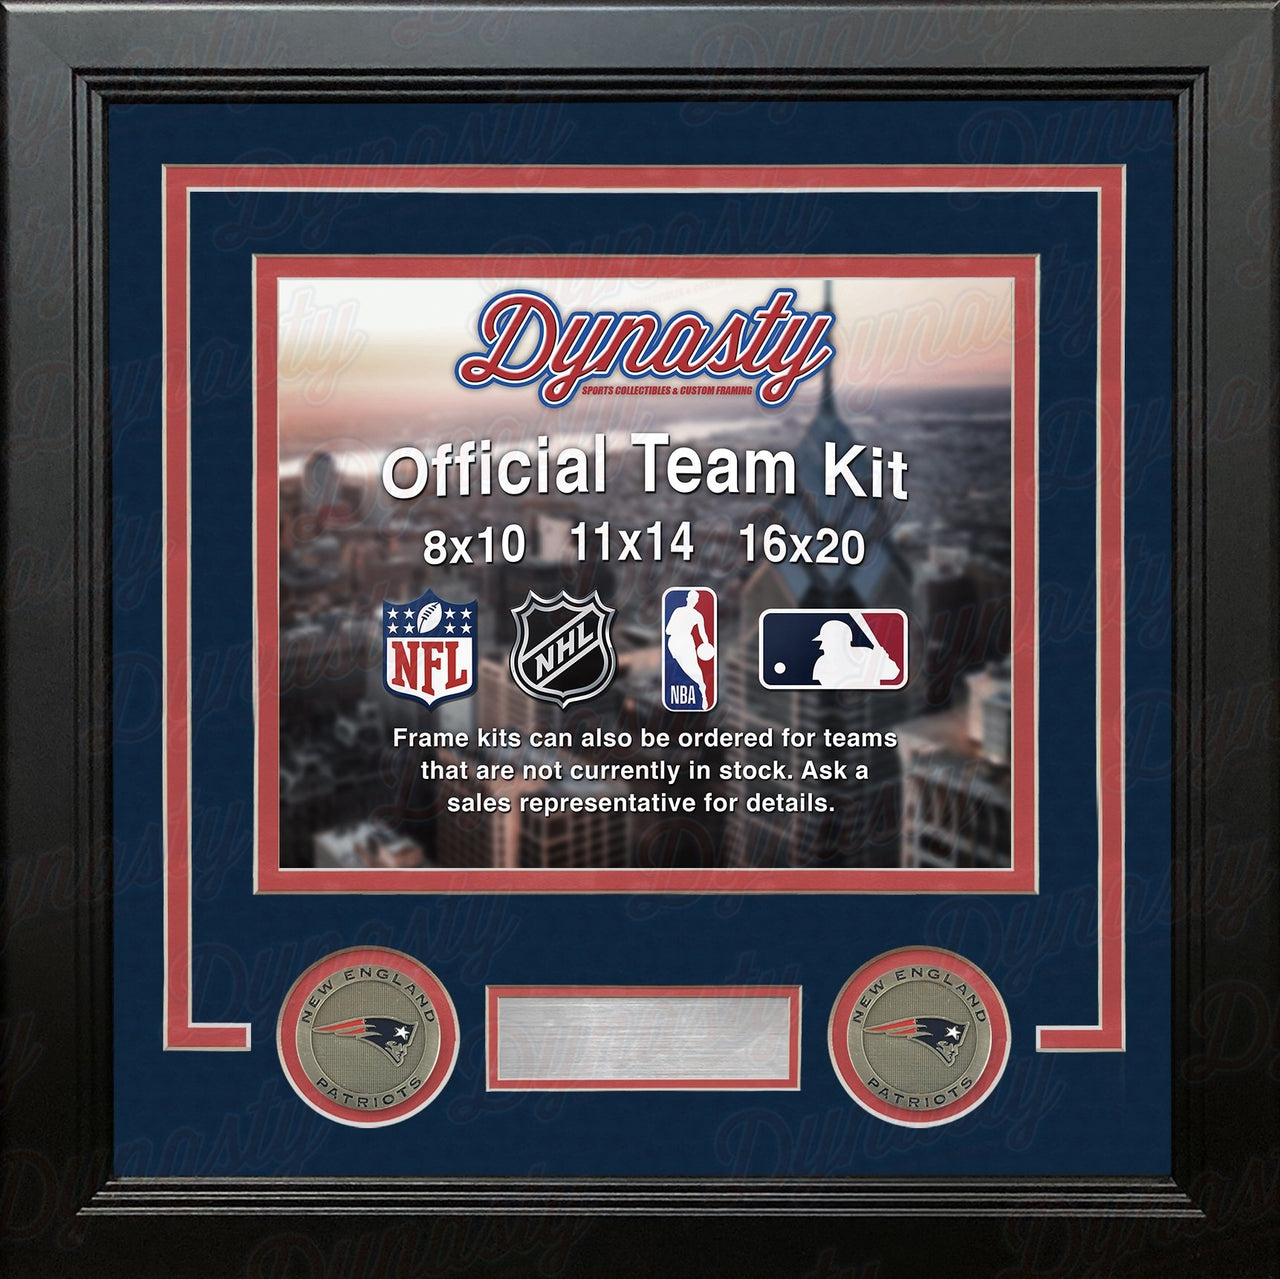 New England Patriots Custom NFL Football 11x14 Picture Frame Kit (Multiple Colors) - Dynasty Sports & Framing 